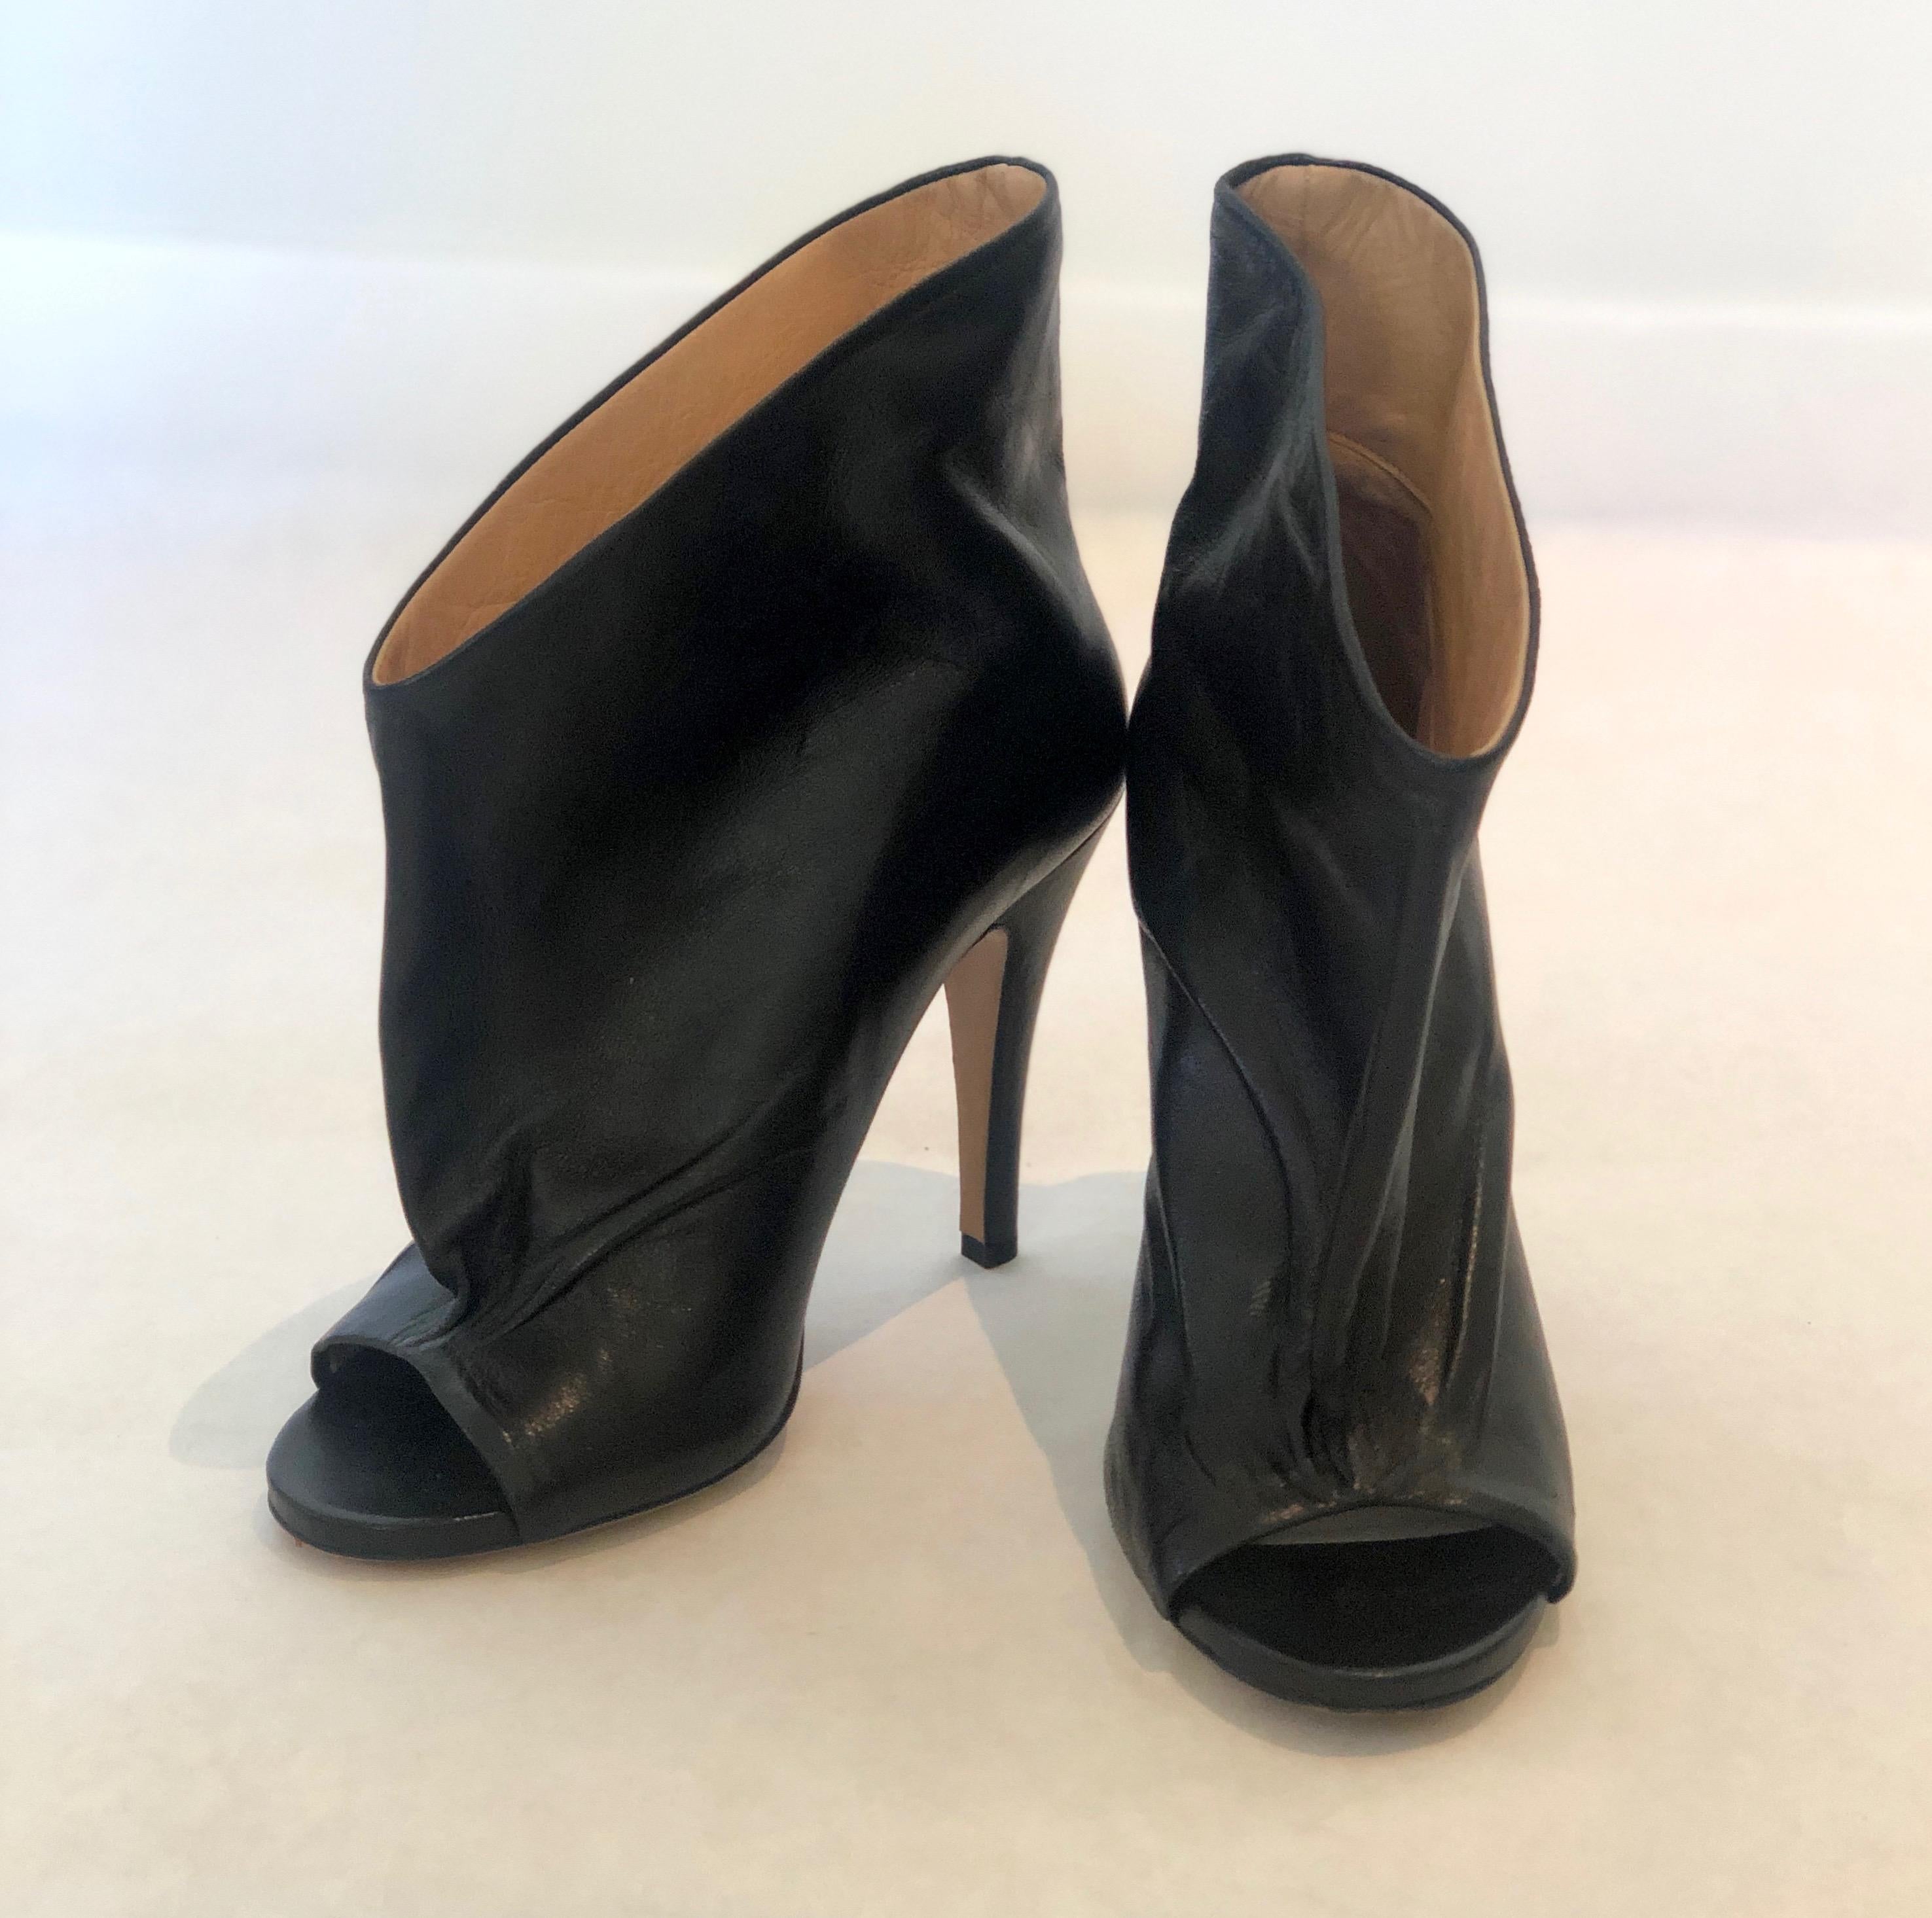 Make:  Maison Martin Margiala
Place of Manufacture:  Paris
Size:  39.5 EU / 9.5 U.S.
Materials:  Leather
Color:  Black exterior with tan leather interior
Style:  Open toe ankle boots / bootie with 4